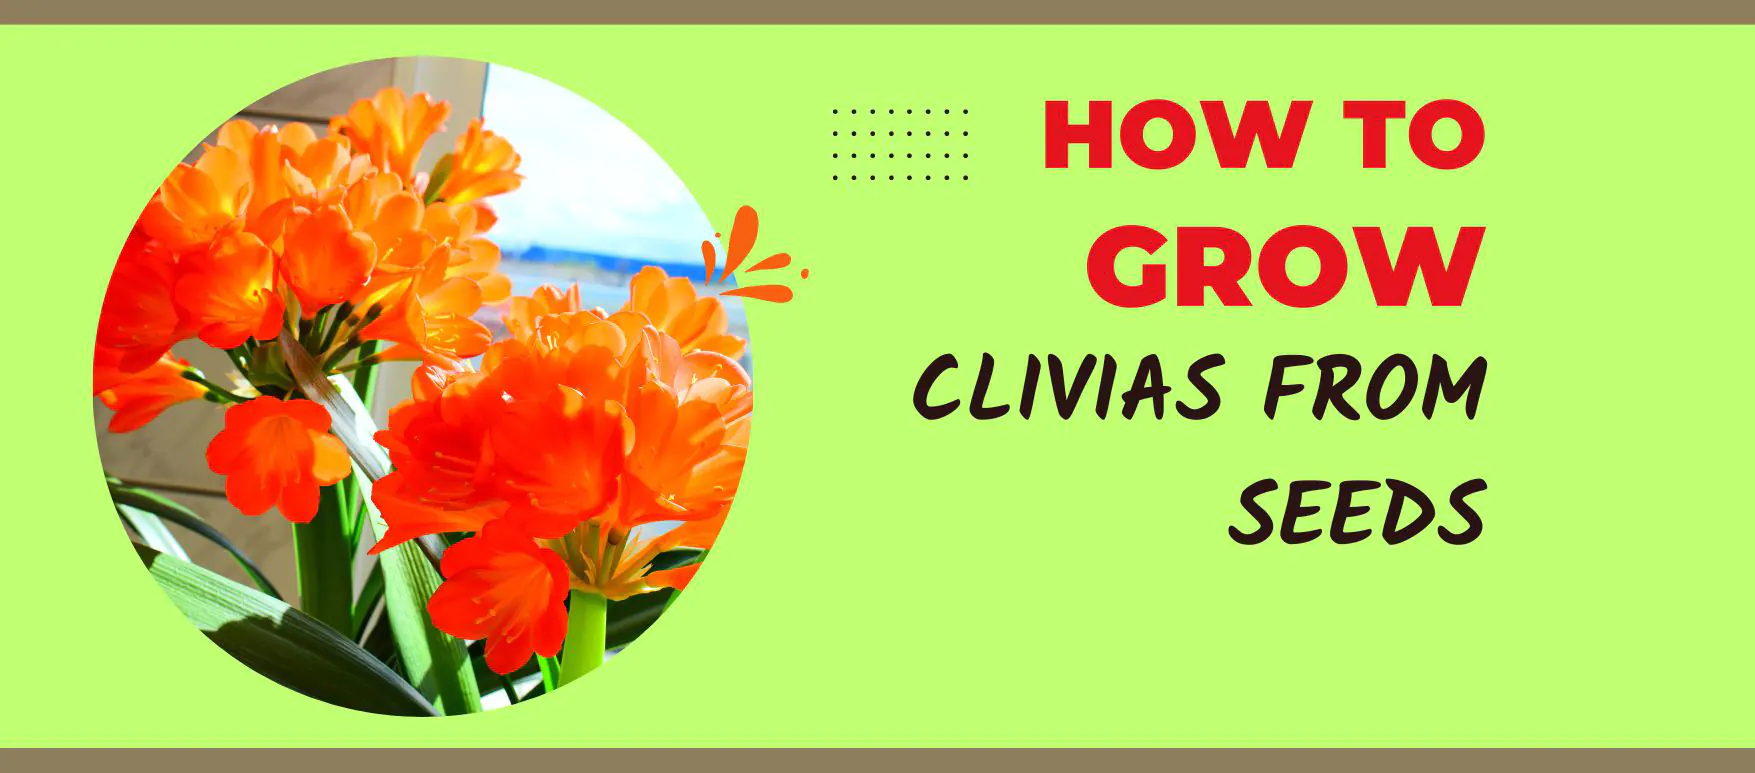 How to grow clivias from seed